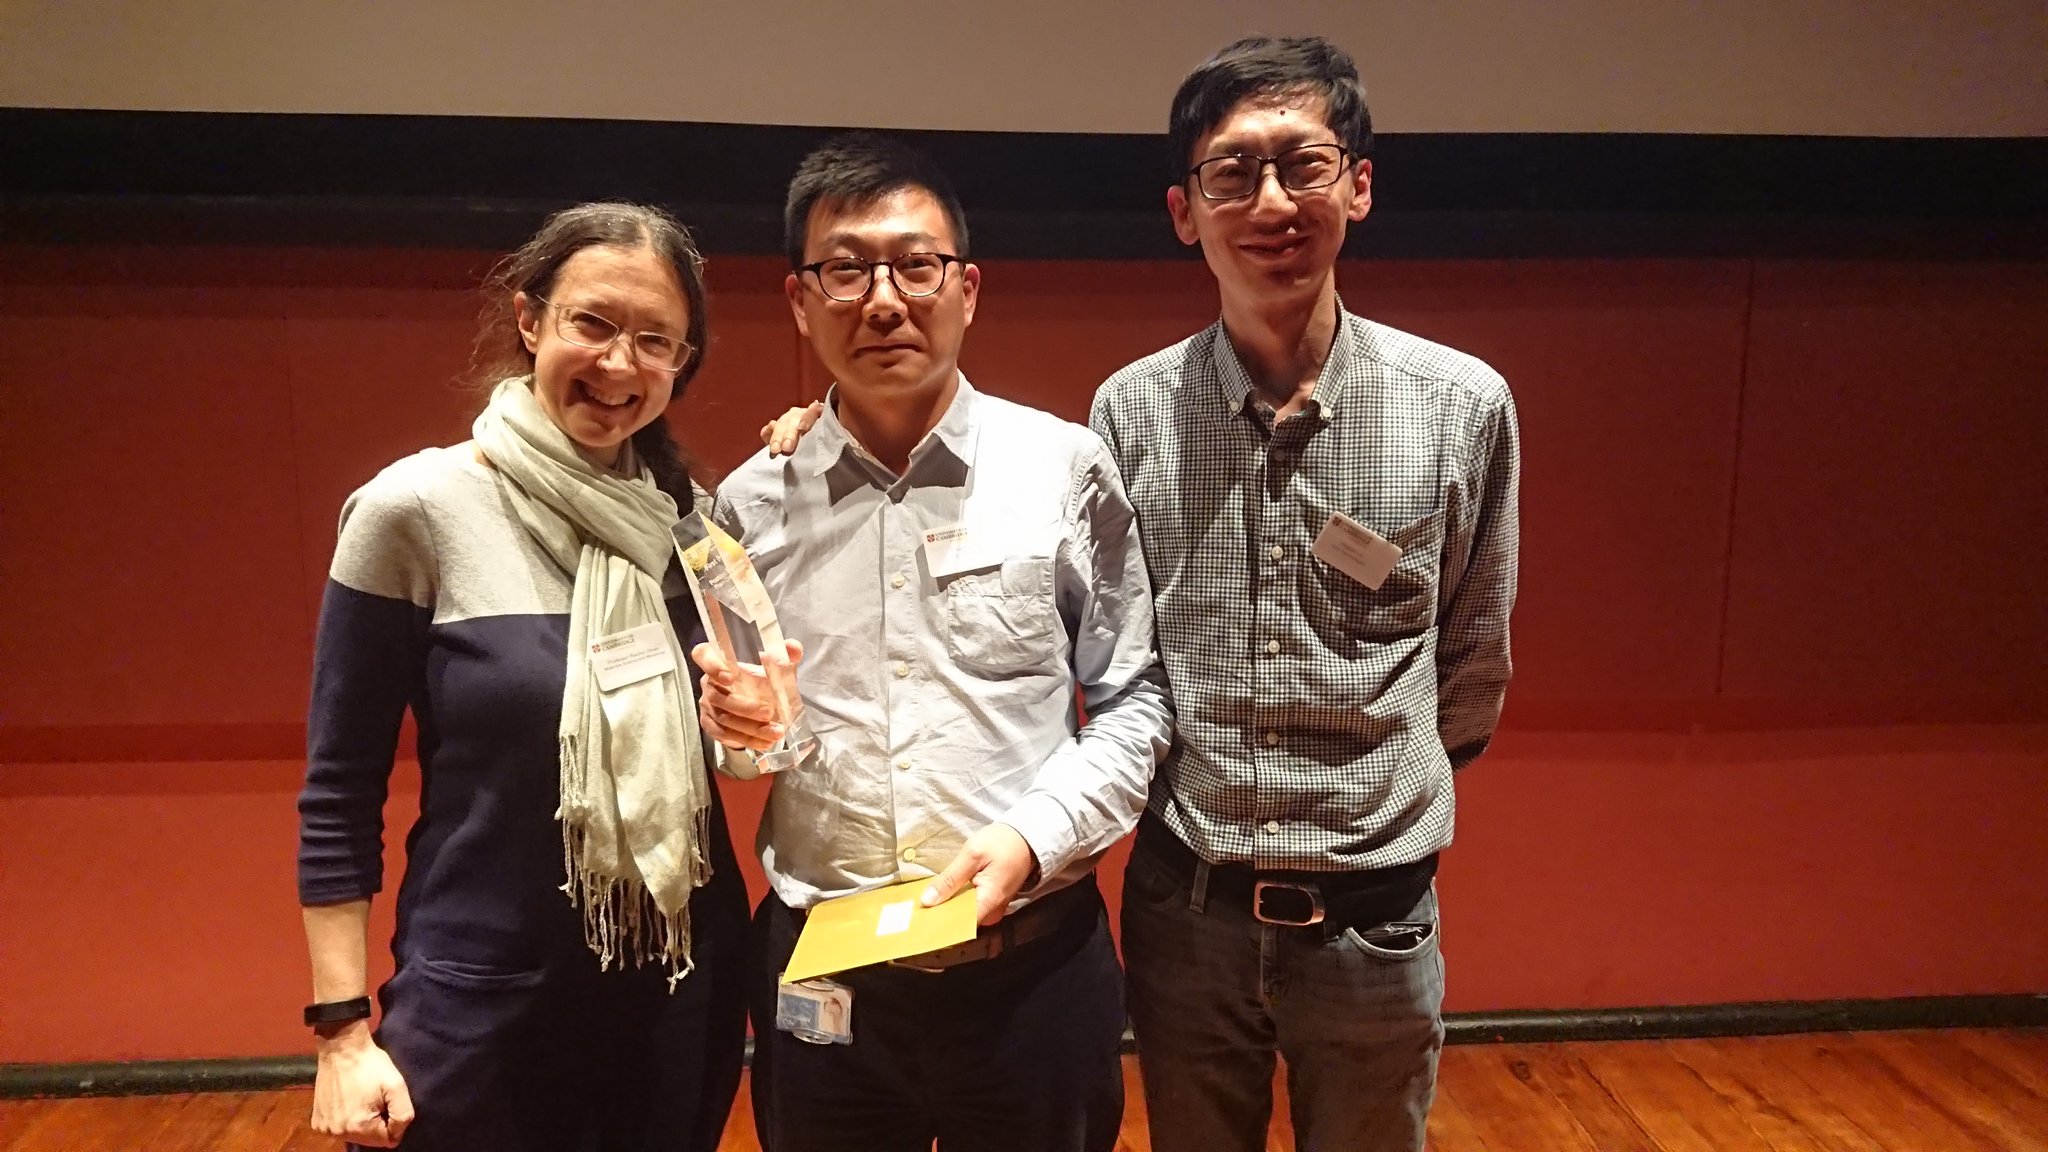 The three officers of Poro Technologies with the award. From left to right: Rachel Oliver, Tongtong Zhu and Yingjun Liu.